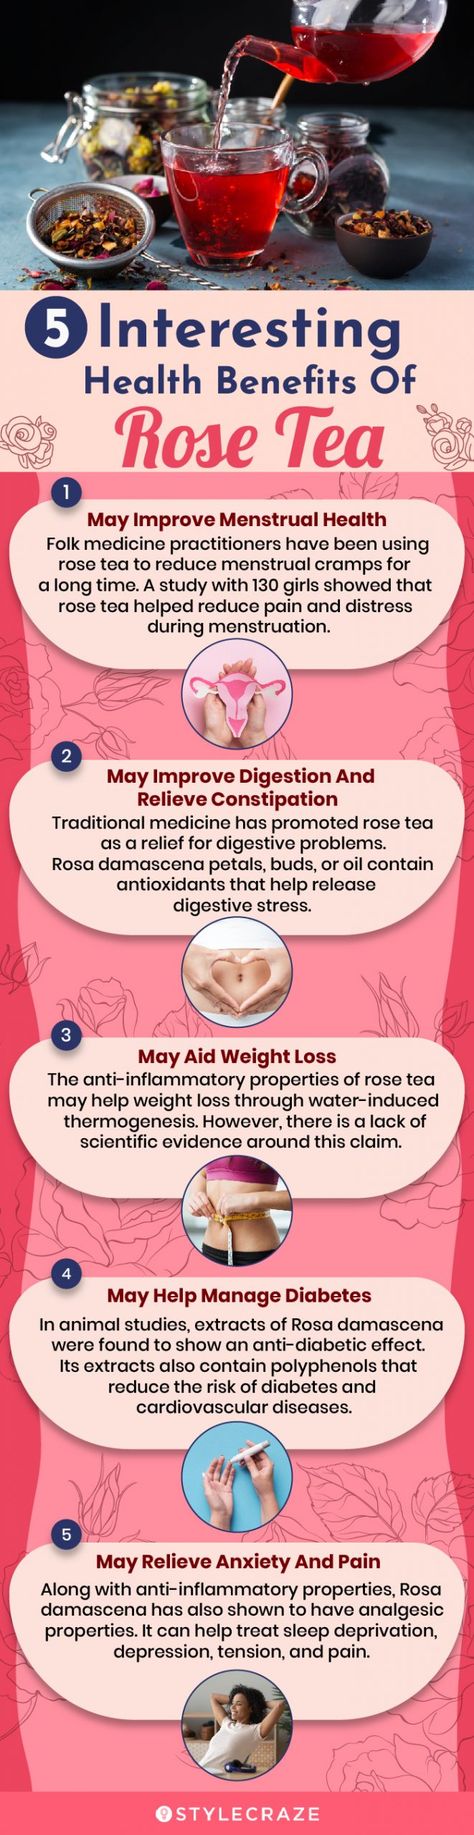 How Is Rose Tea Good For Your Health And Well-being? Ideas, Fitness, Acupuncture, Herbs, Healing Food, Healing Herbs, Herbalism, Tea Benefits, Hibiscus Tea Benefits